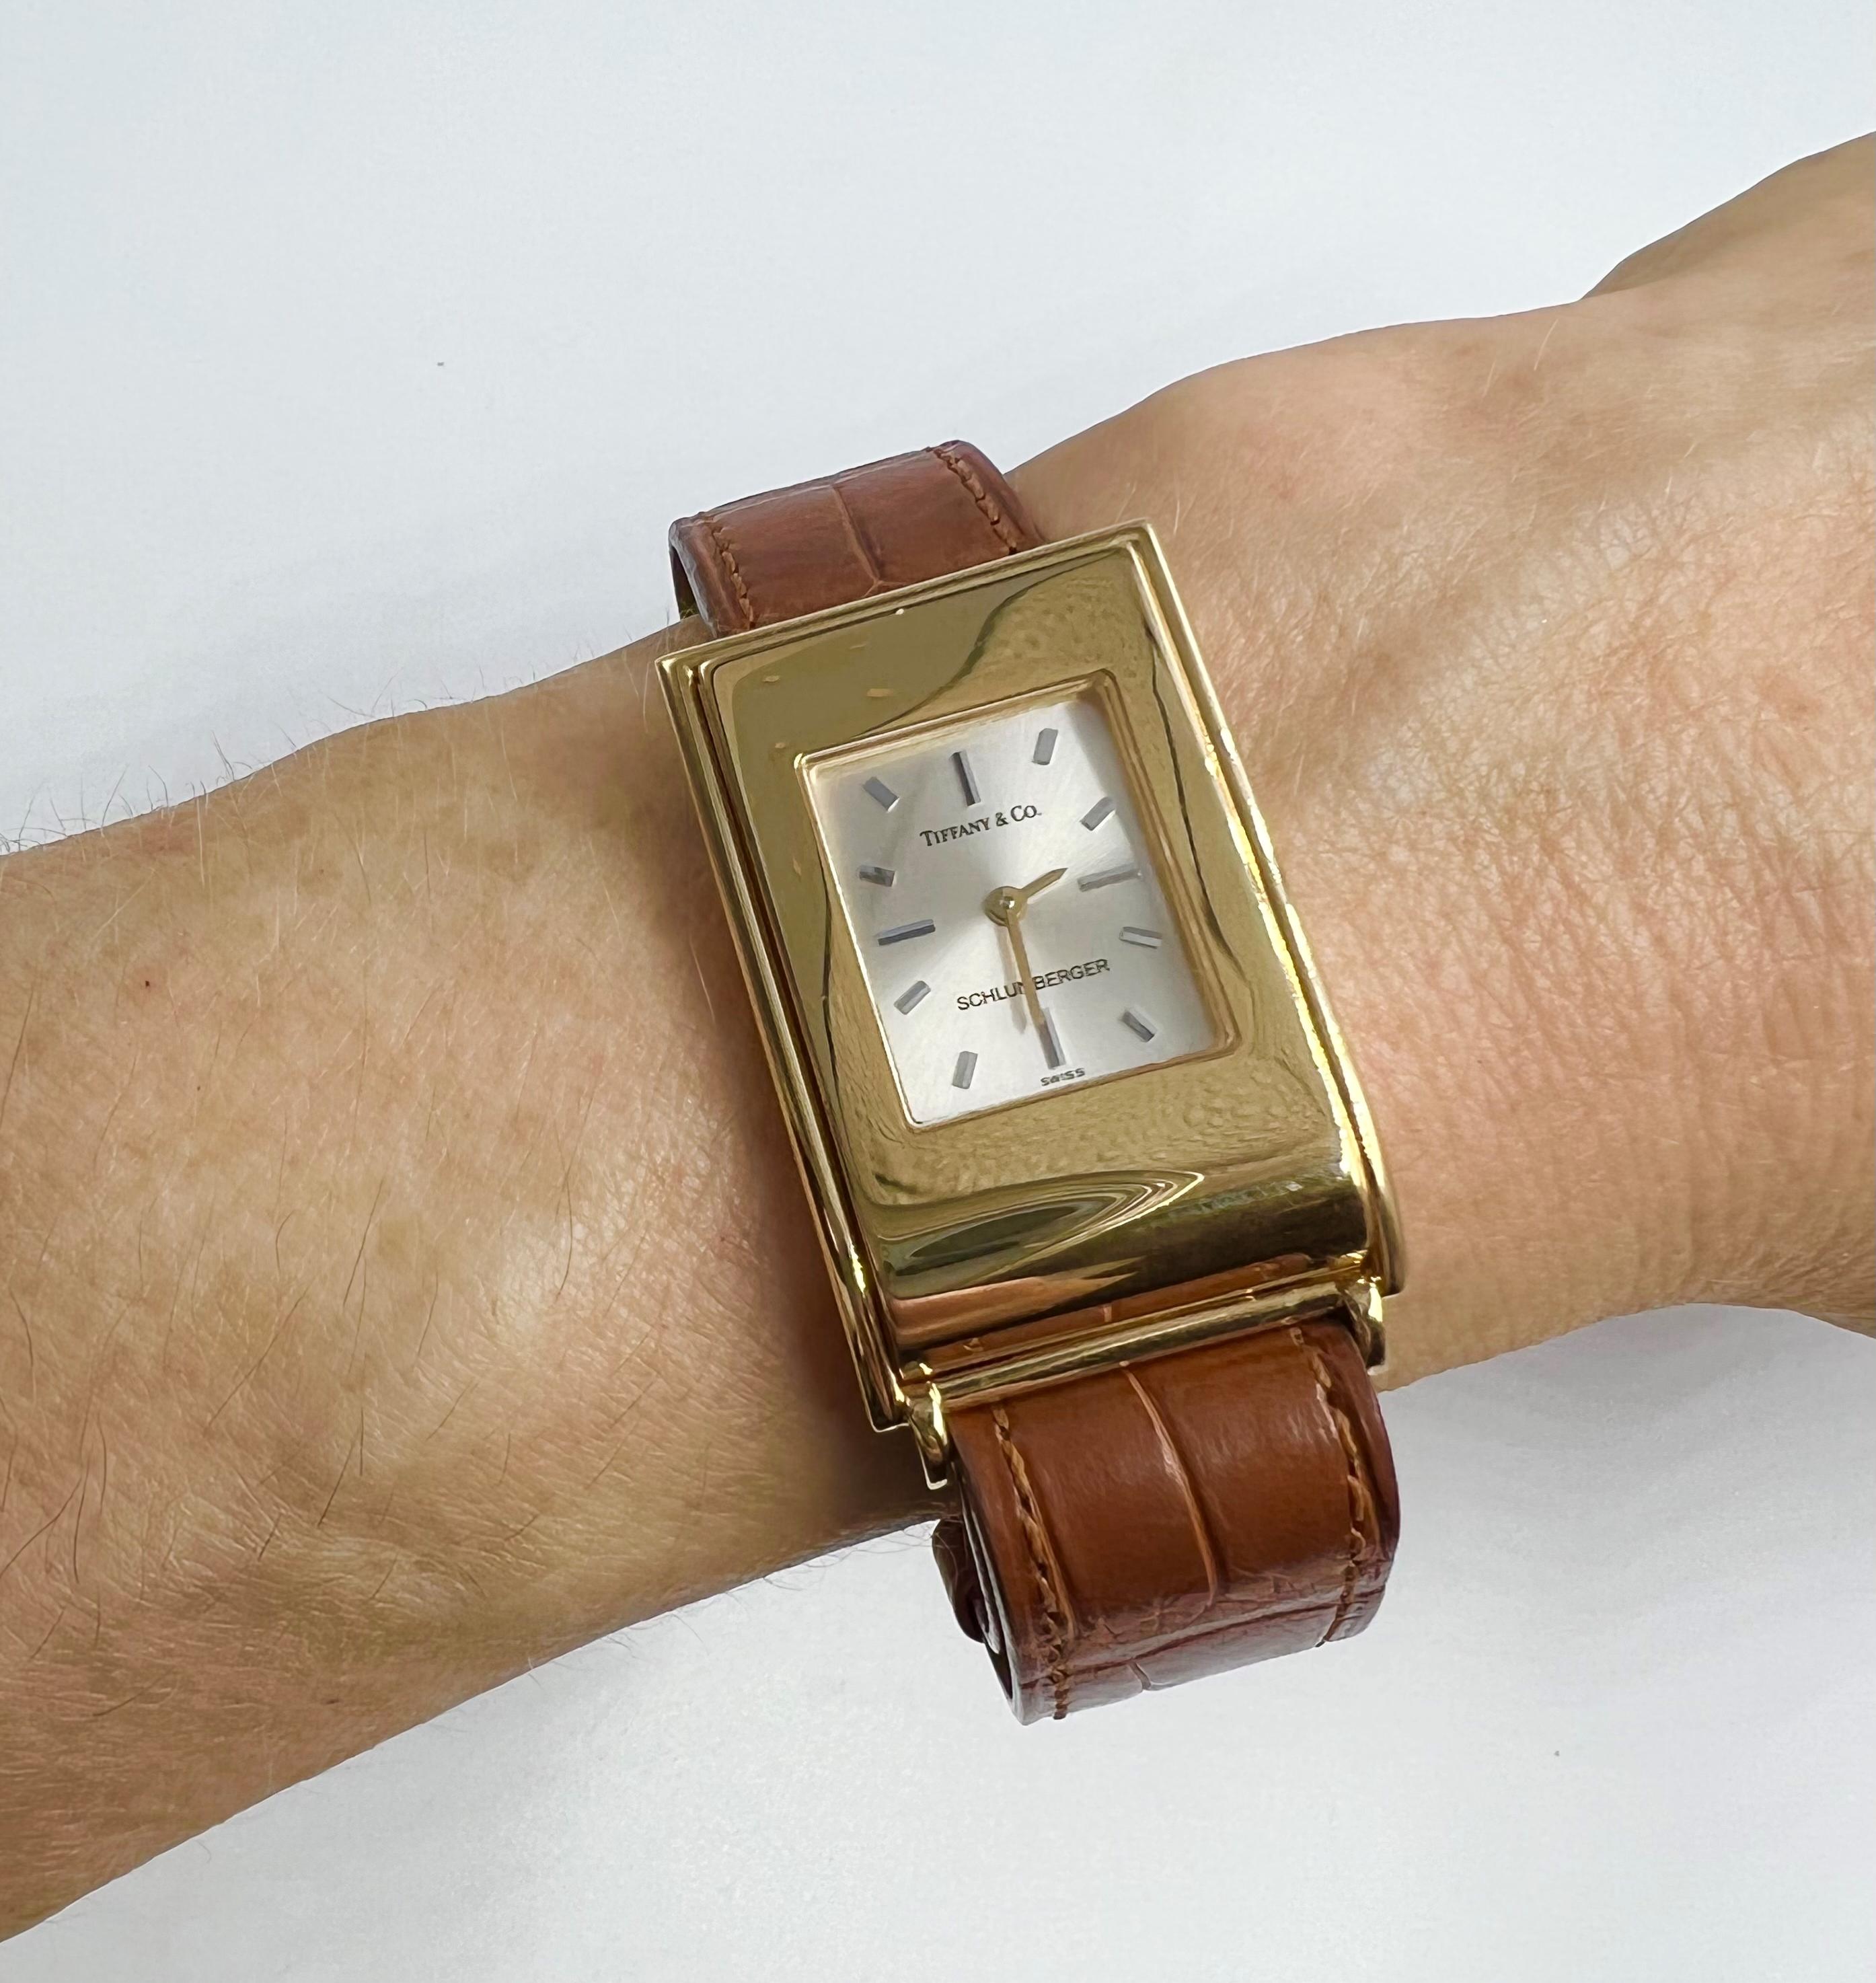 Tiffany & Co. Schlumberger 18k yellow gold lady's wrist watch.  Rectangular case measuring L.35 x W.23.3mm.  Silver tone dial with stick markings and 